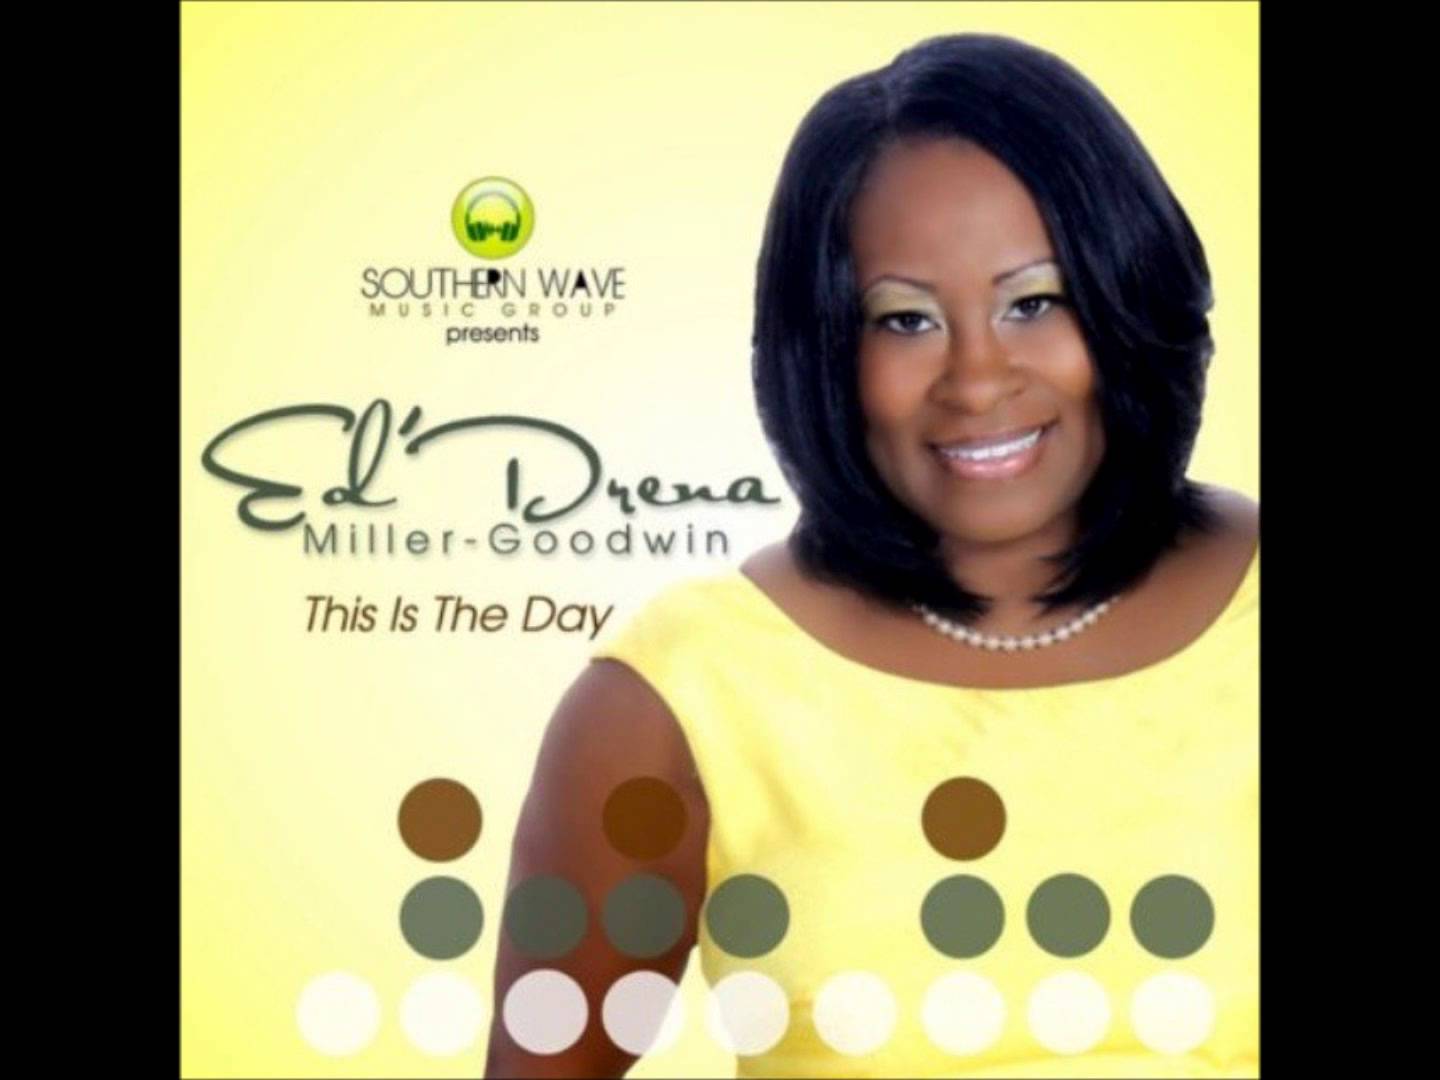 This Is The Day- Eddrena Miller Goodwin/Track by Micah Braxton